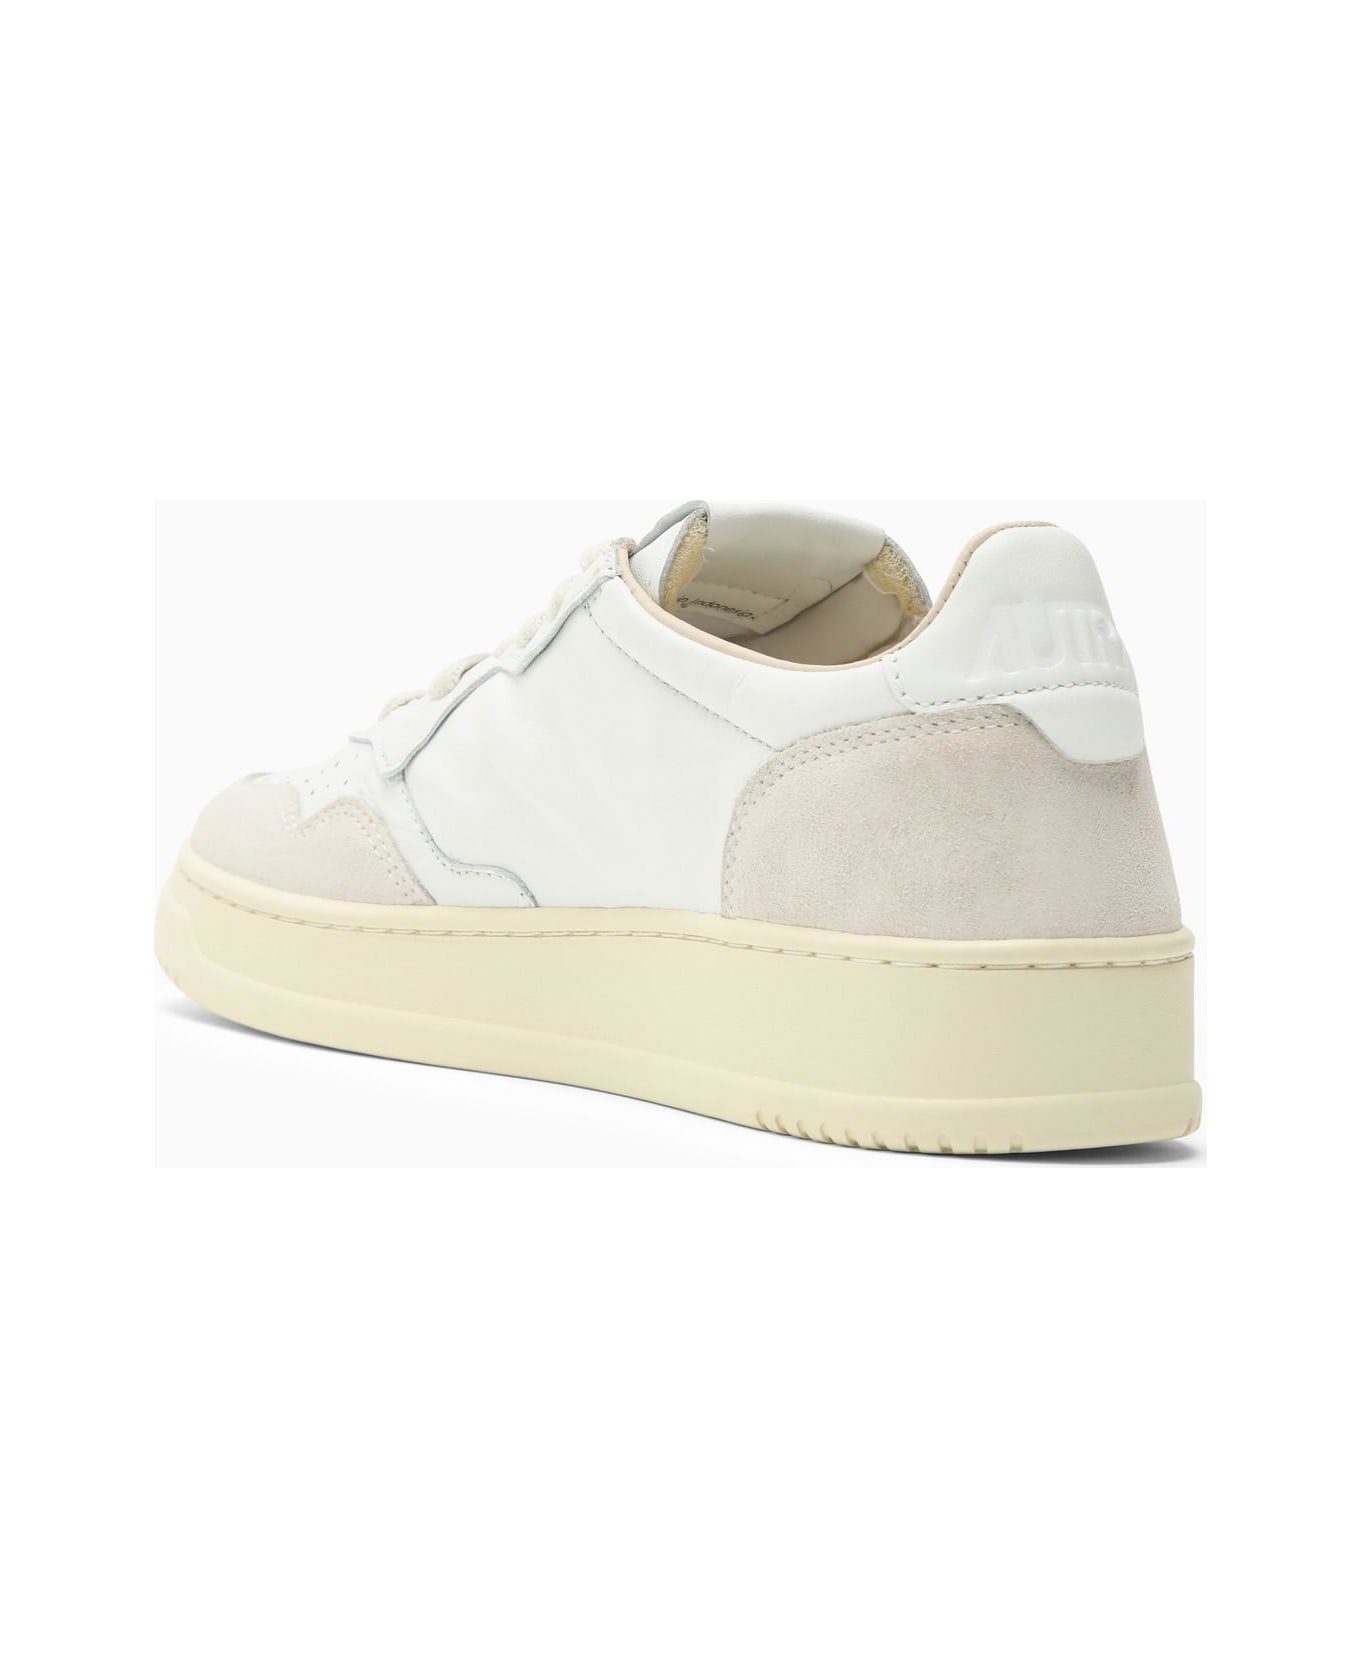 Autry Medalist Trainer In White Leather And Suede スニーカー